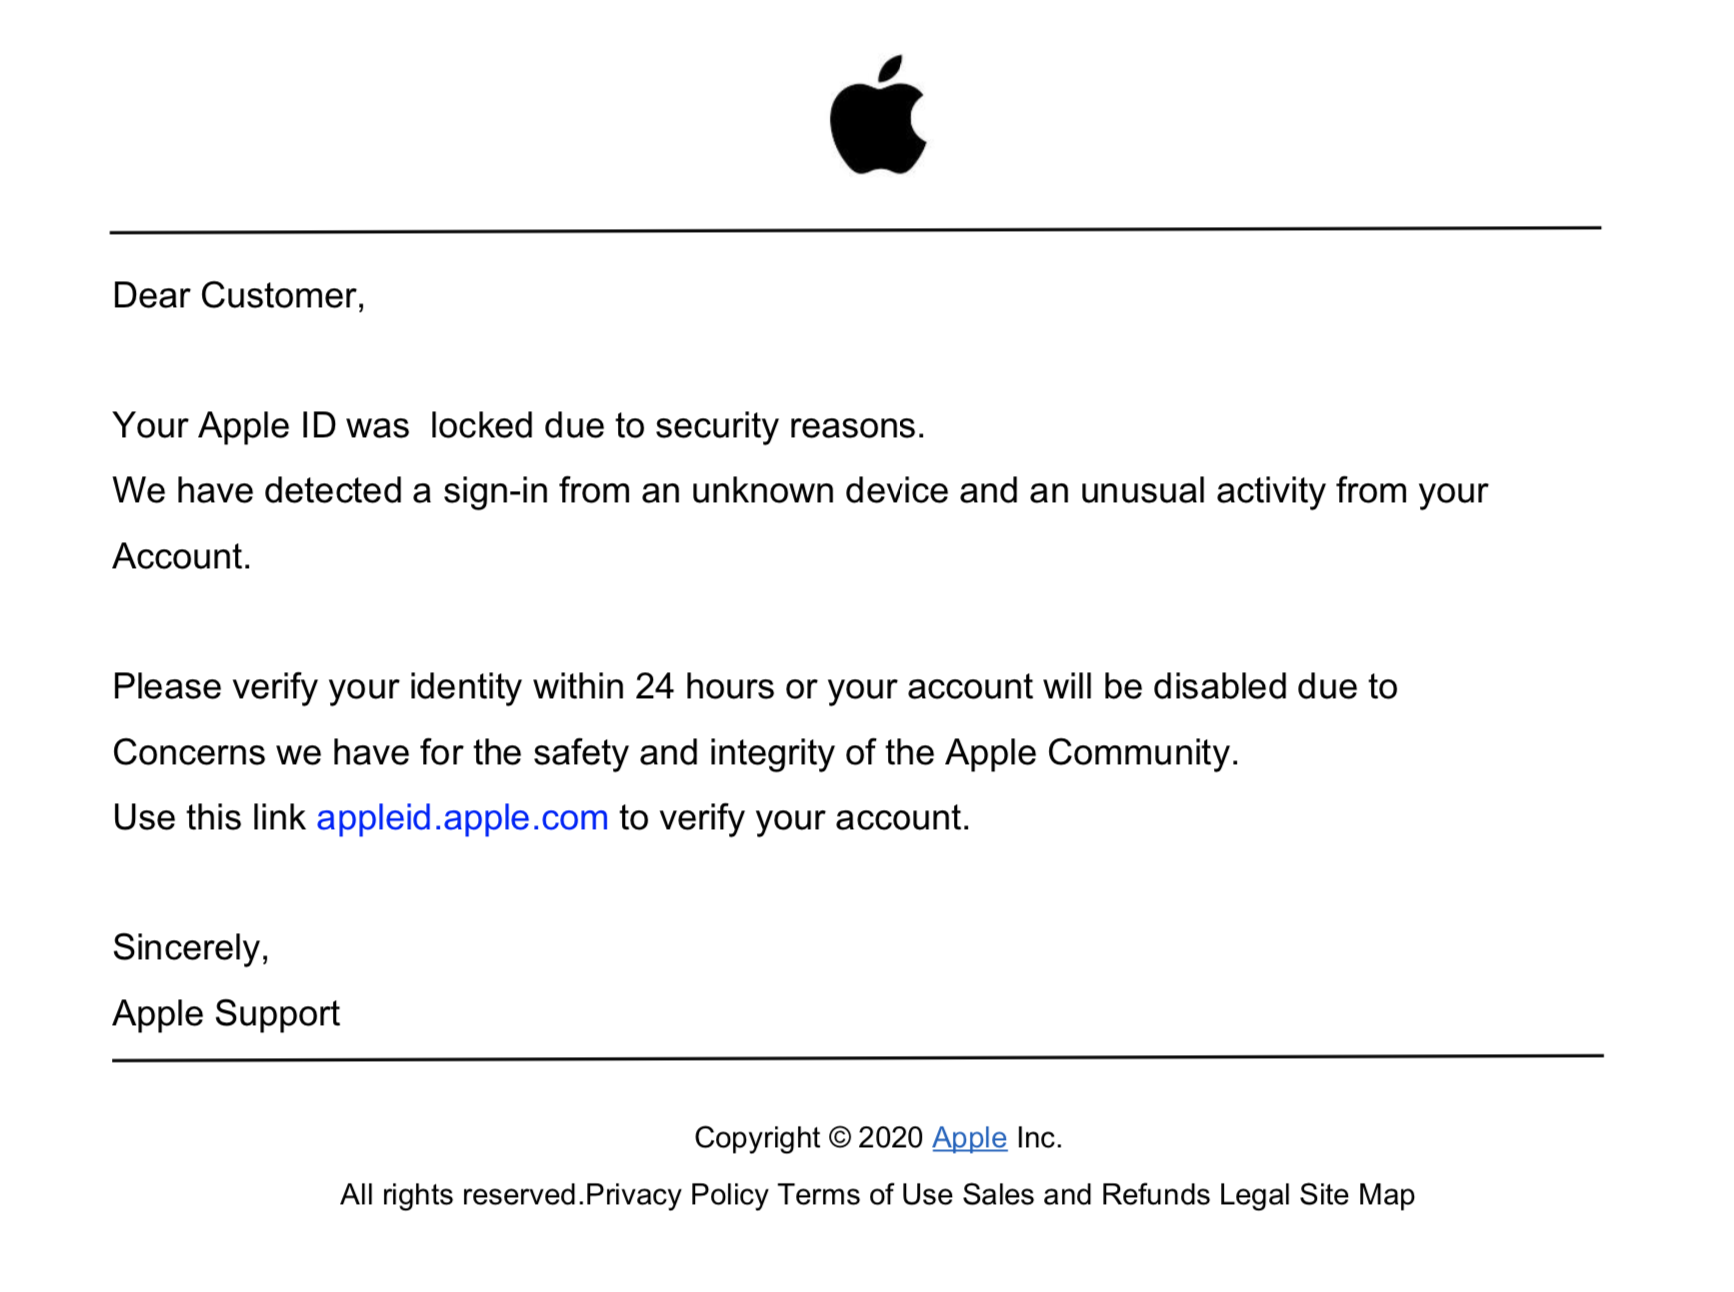 A phishing PDF purporting to be from Apple. It reads: "Dear Customer, Your Apple ID was locked due to security reasons. We have detected a sign-in from an unknown device and an unusual activity from your Account." From there, it tries to entie the user to "verify your account," opening up credential stealing. E-commerce scams such as this one were one of the top phishing trends with PDF files that we observed. 